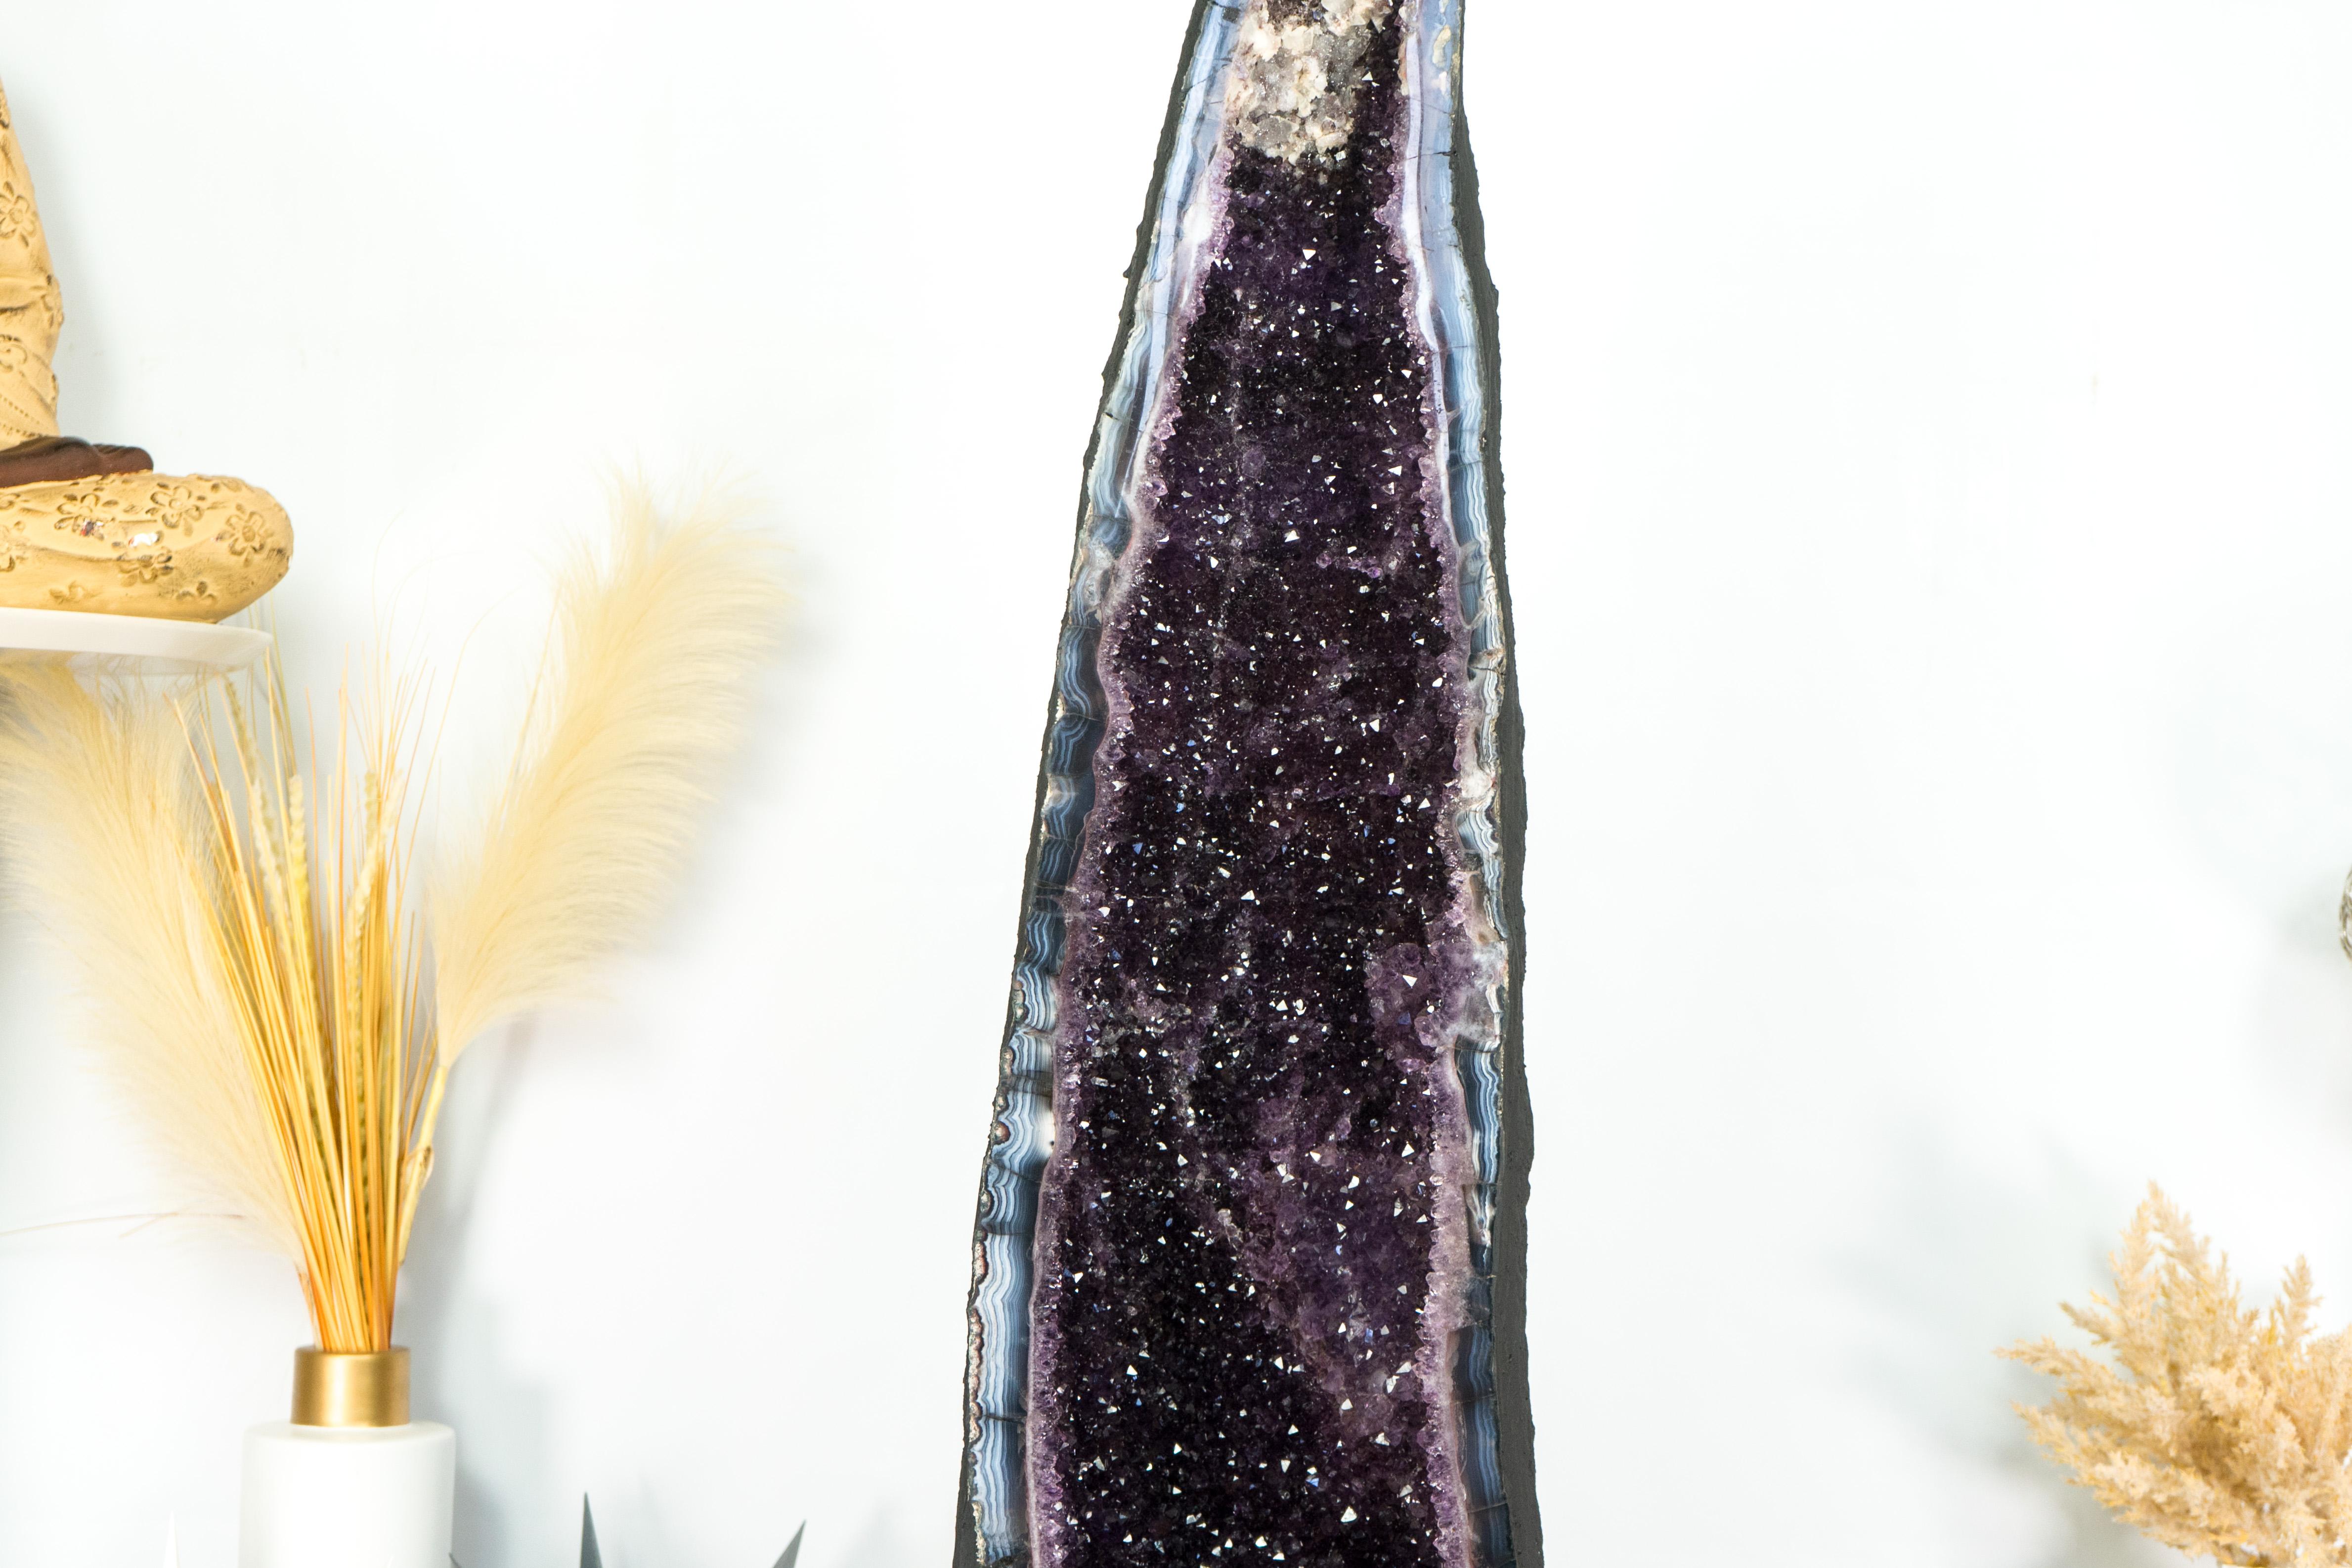 Deep Purple Amethyst Cathedral Geode, with Lace Agate and Calcite, Large & Tall For Sale 6